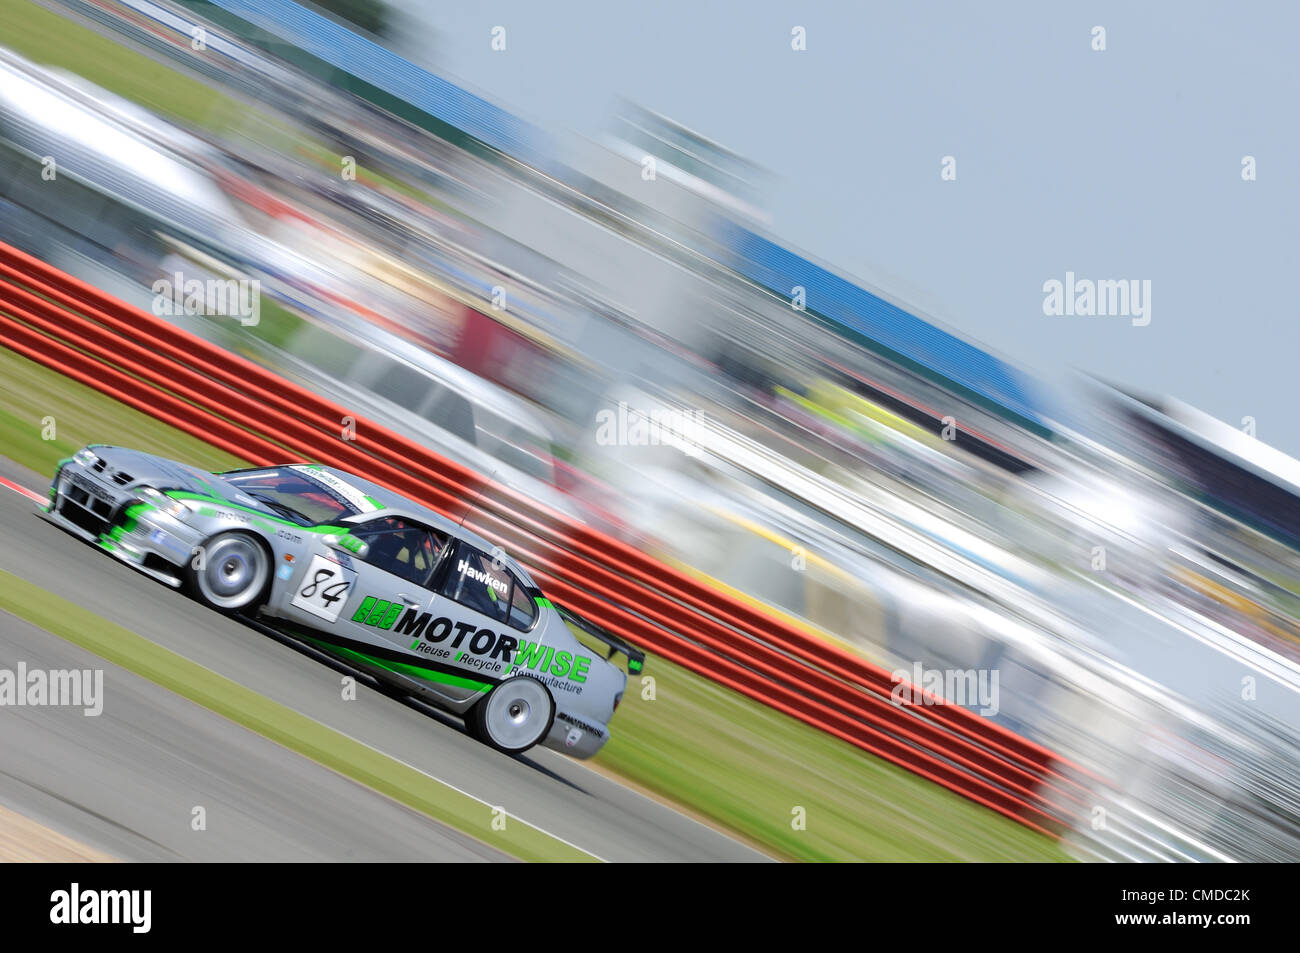 22nd July 2012, Silverstone, UK.  Third place finisher Richard Hawken's Nissan Primera during the Fujifilm Touring Car Trophy 1970 - 2000 race at Silverstone Classic 2012 Stock Photo